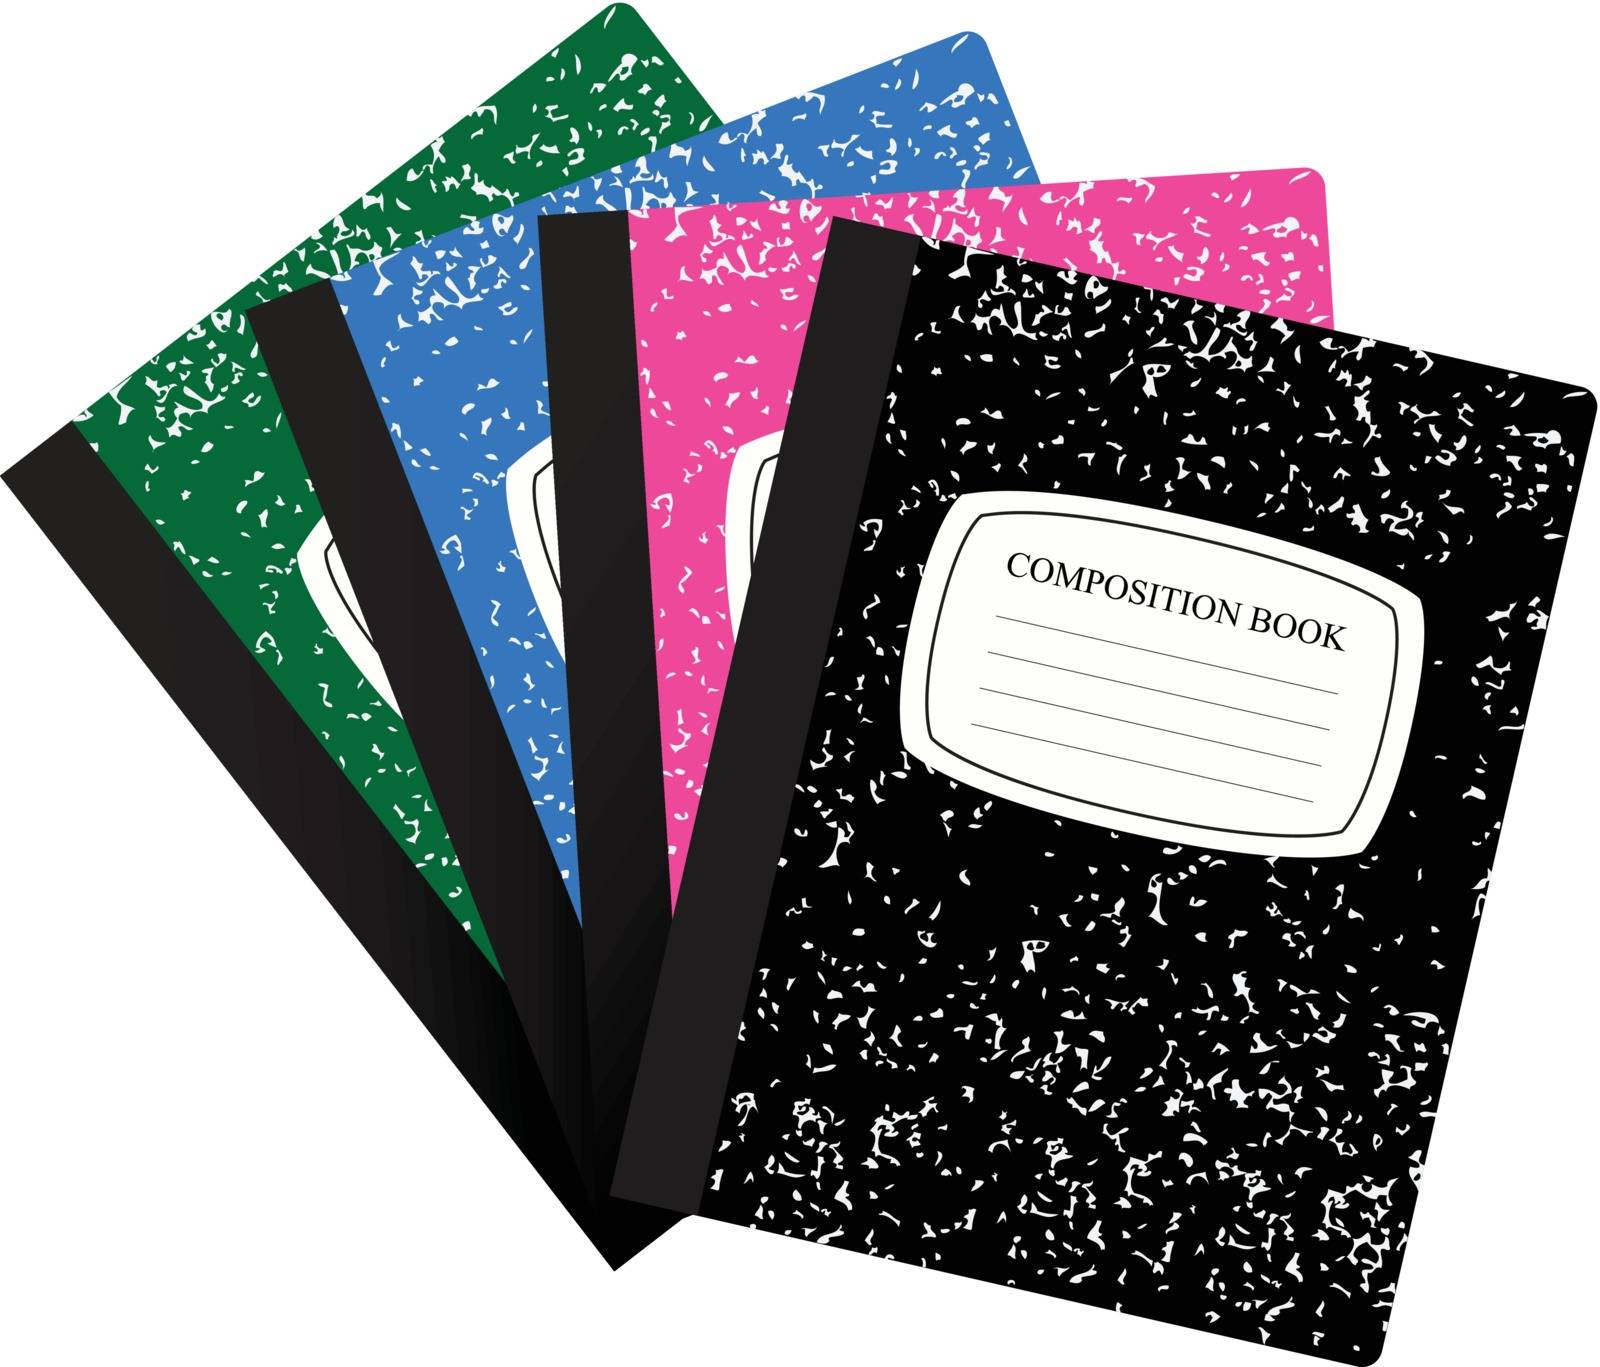 Set of traditional workbooks to study and work in dense cover. Vector illustration.